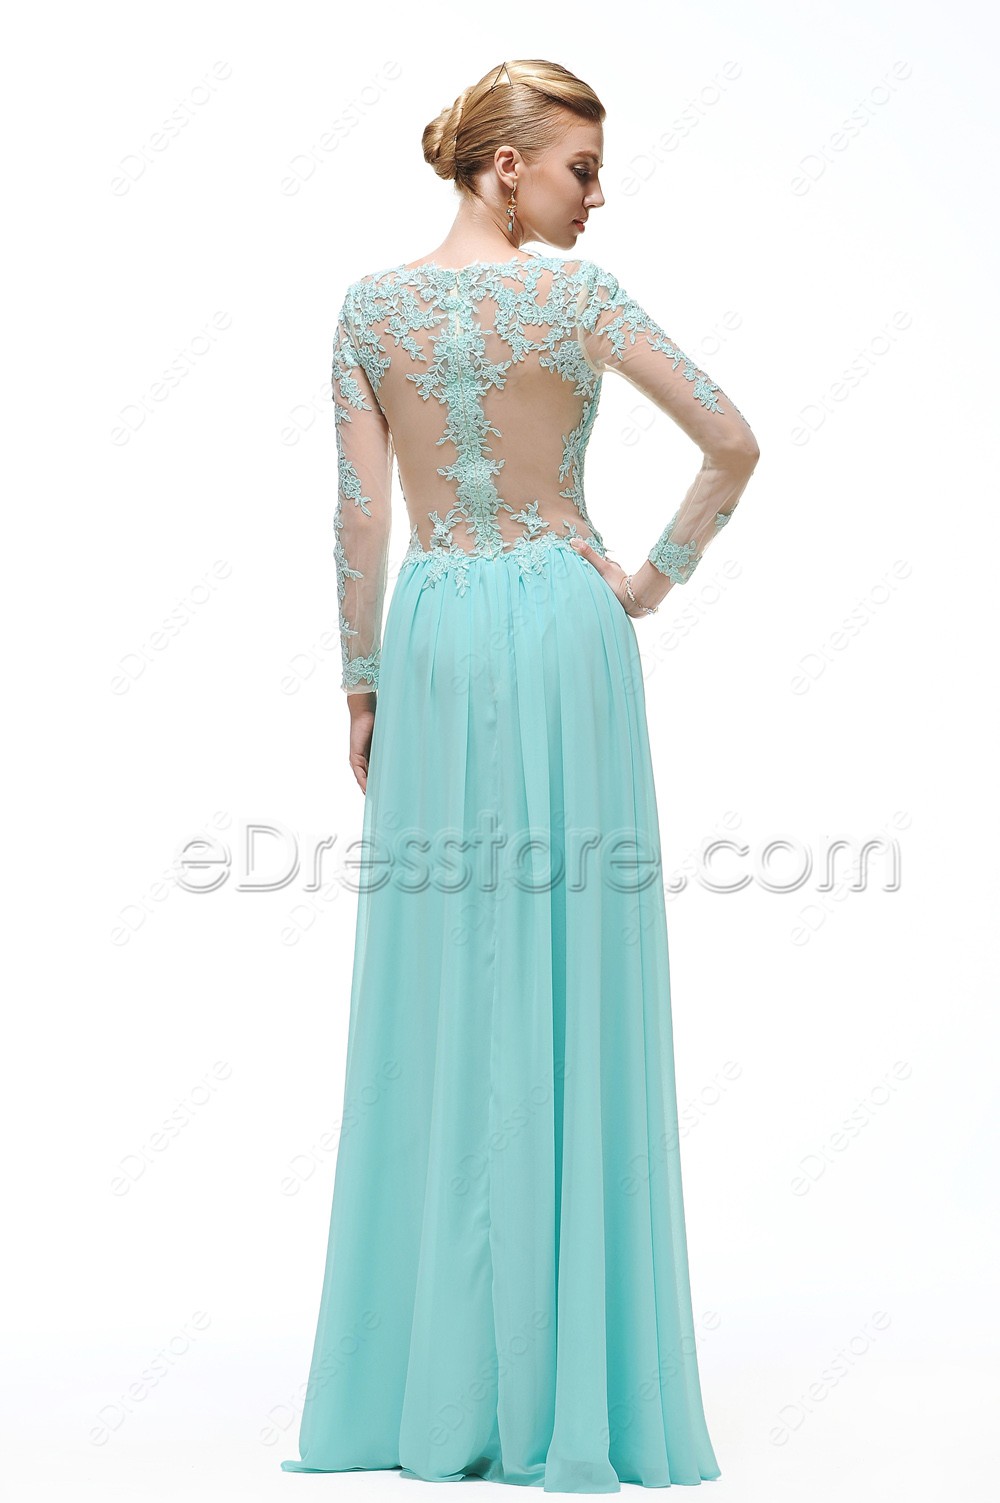  Light  Blue  Backless Lace Modest  Prom  Dress  with Sleeves